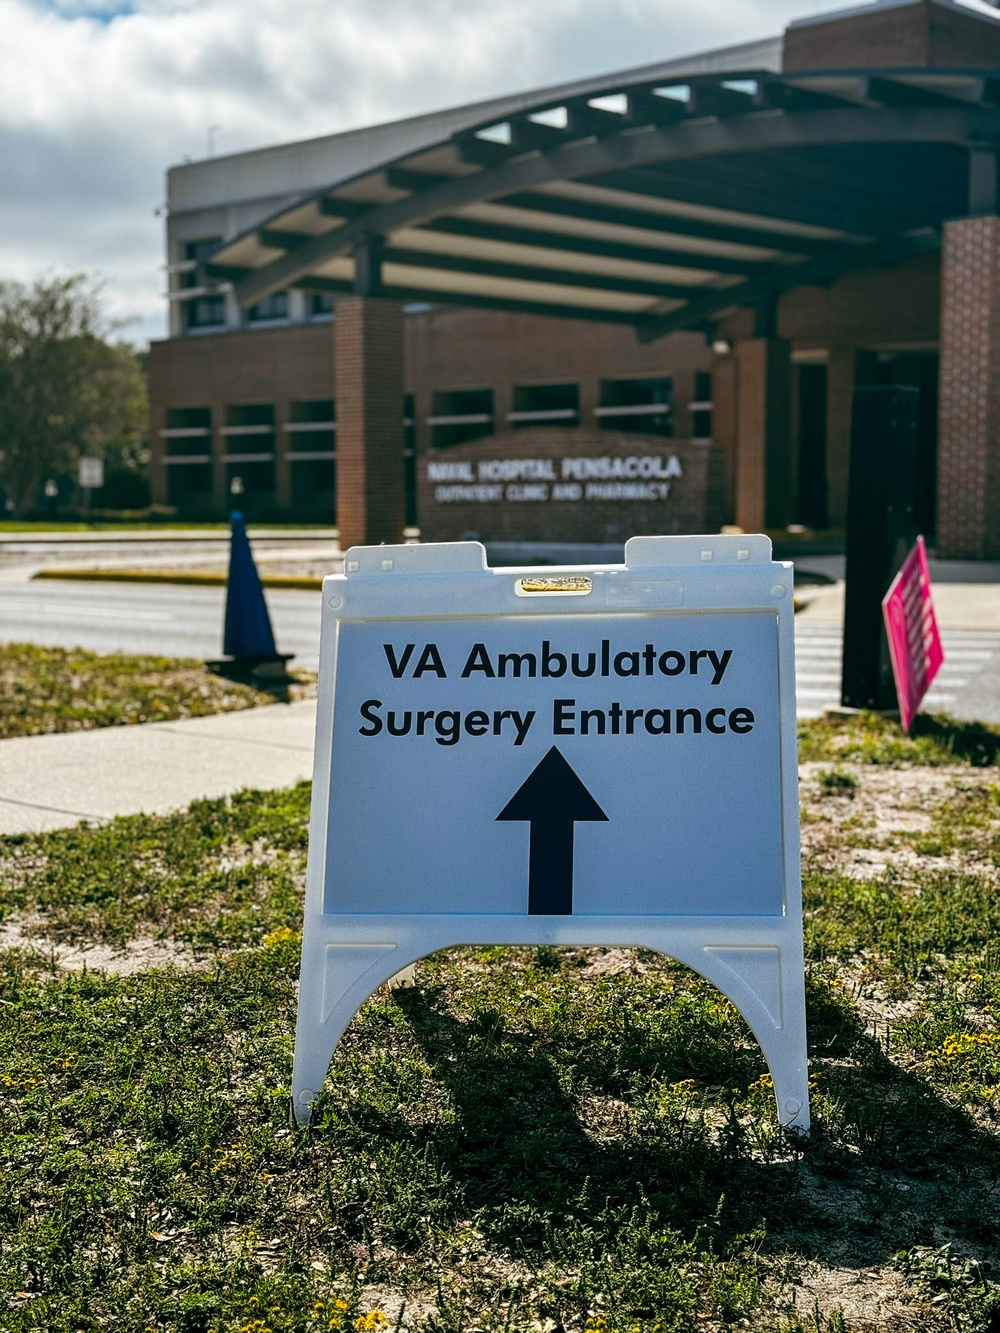 The Department of Veteran Affairs partners with Naval Hospital Pensacola